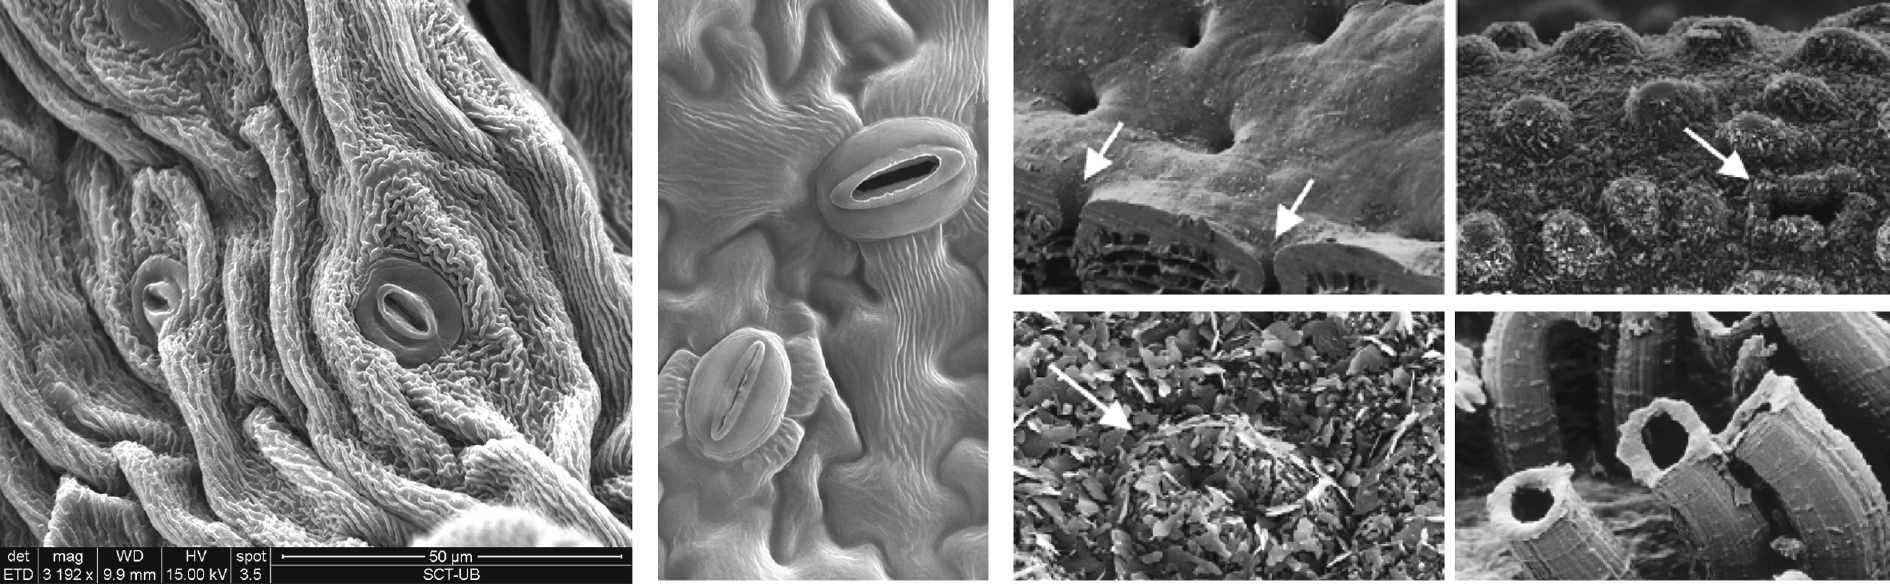 From left to right: stomata on Crucifera leaves; stomatal valve movements on a Lavandula dentata leaf; different morphologies of sunken stomata, waxes, hair structure or chimneys to reduce the evaporation of water.